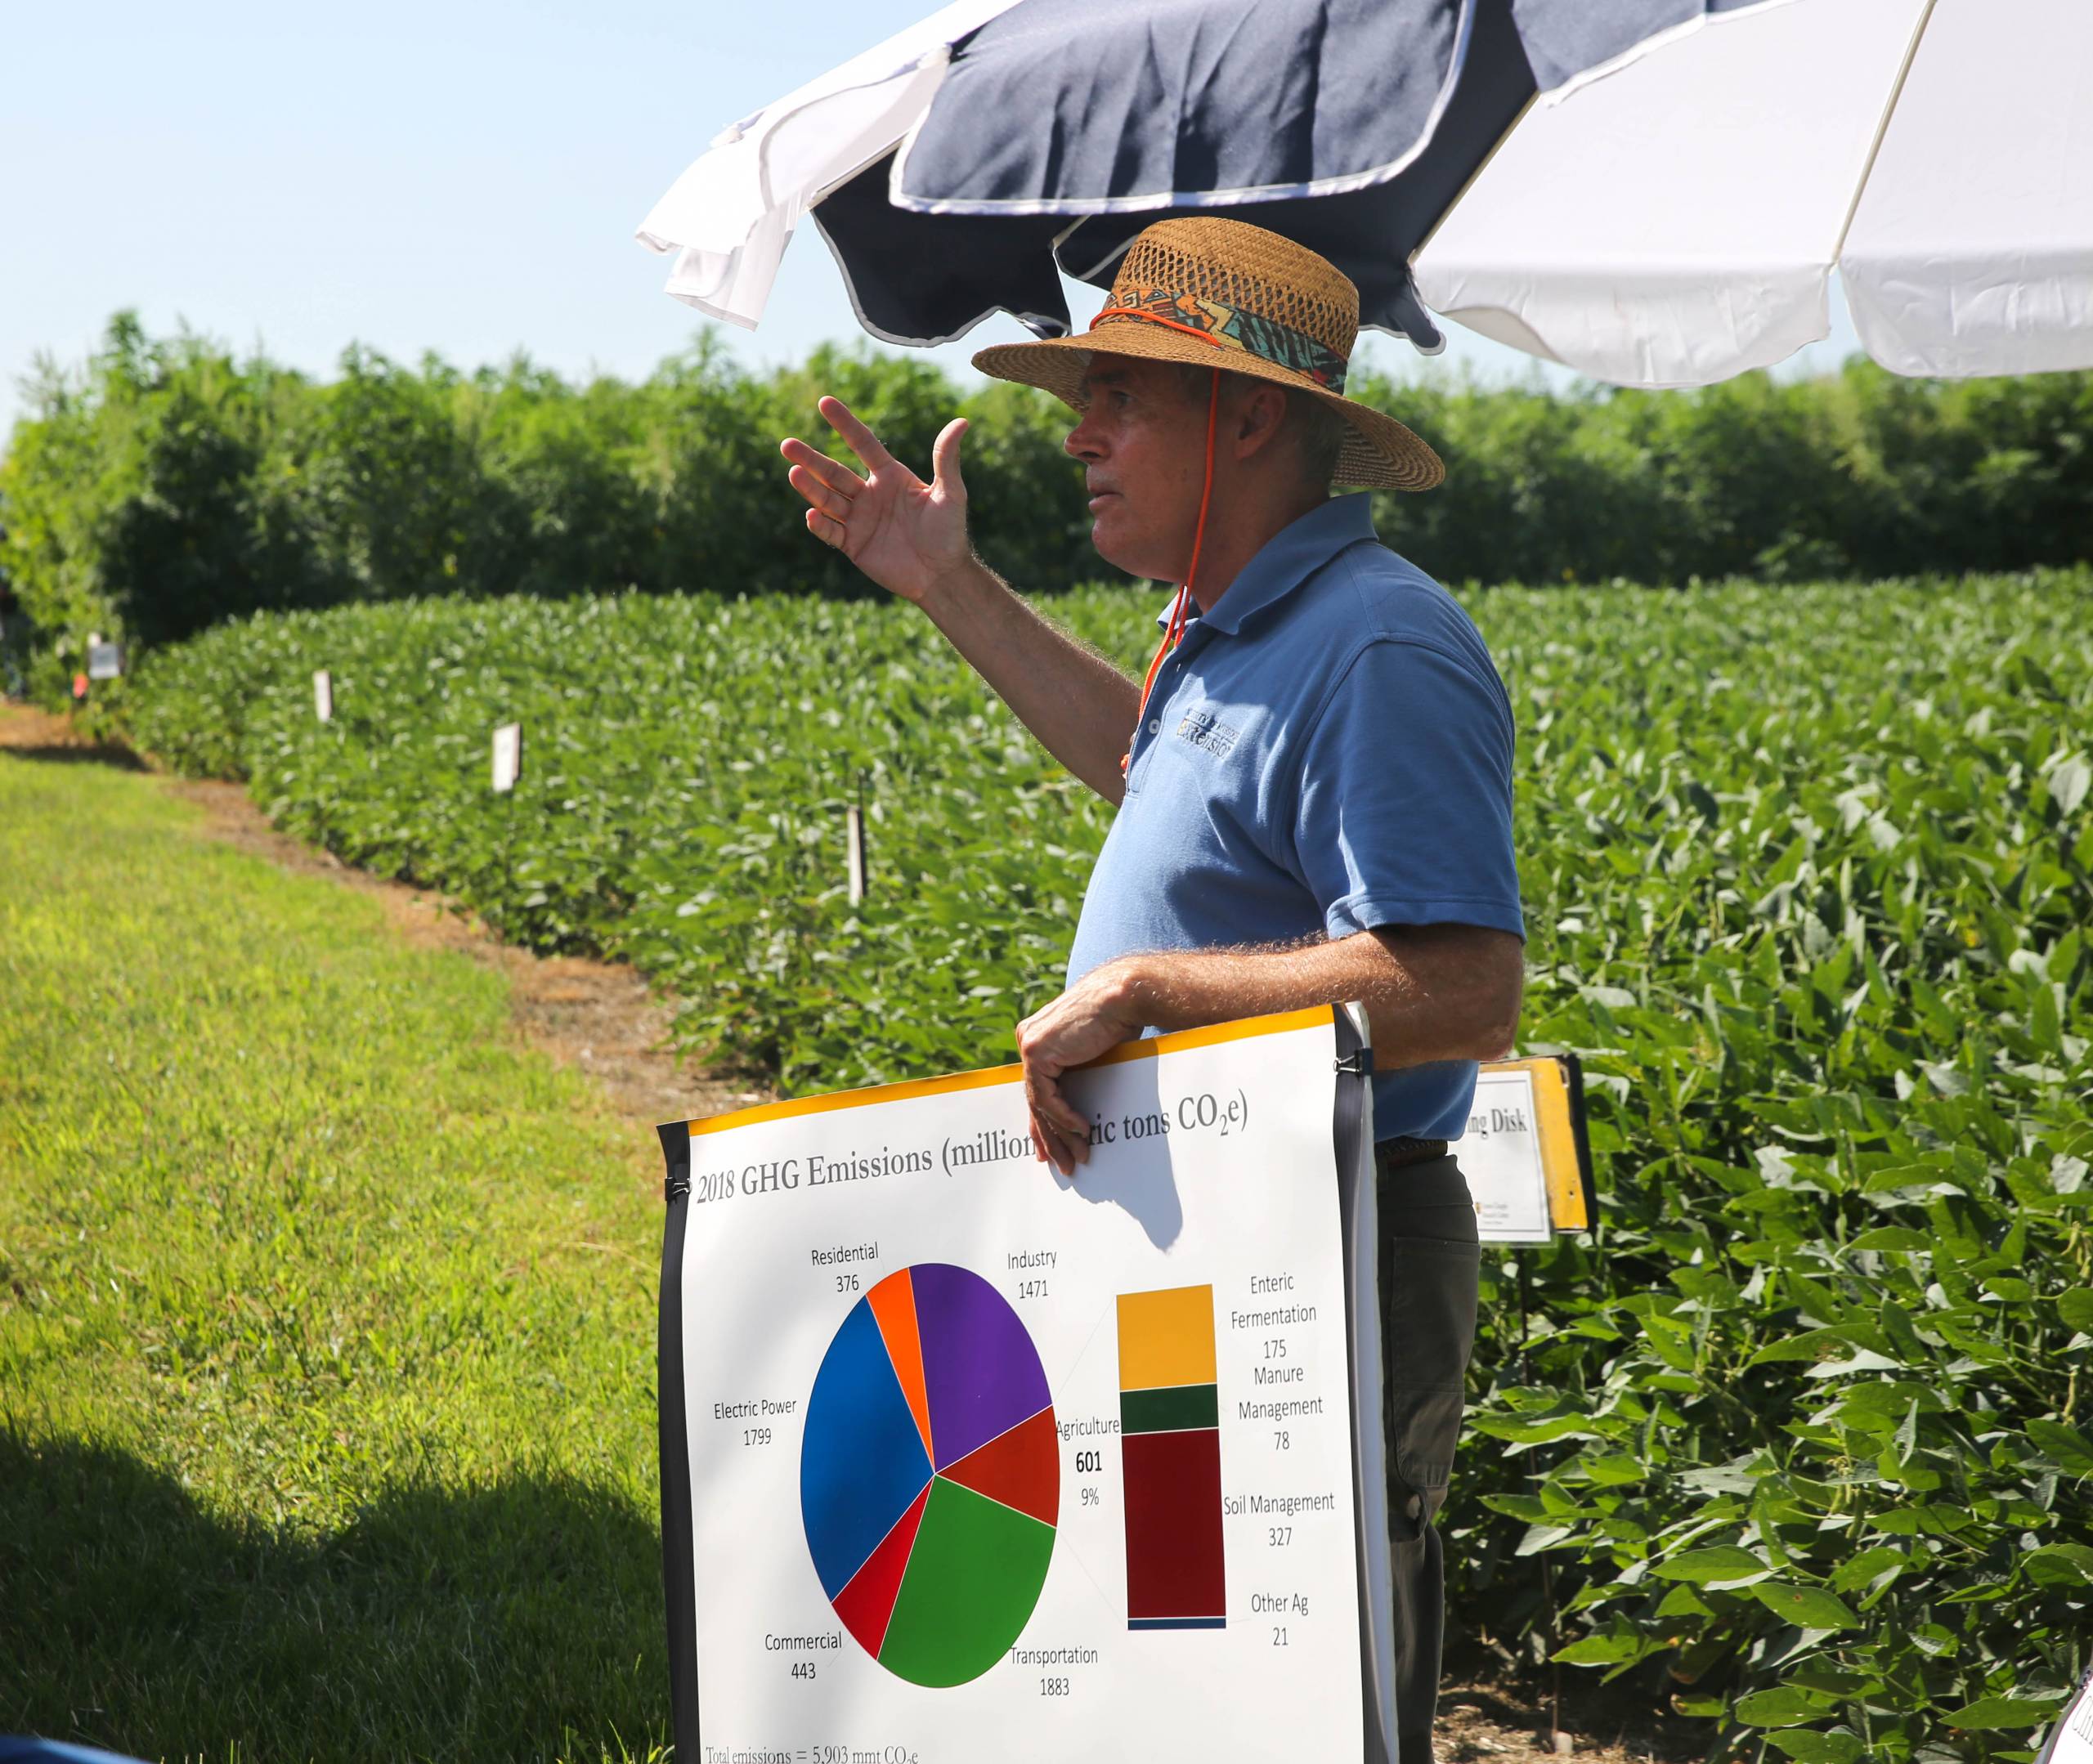 Graves-Chapple Research Center Field Day (click to read)